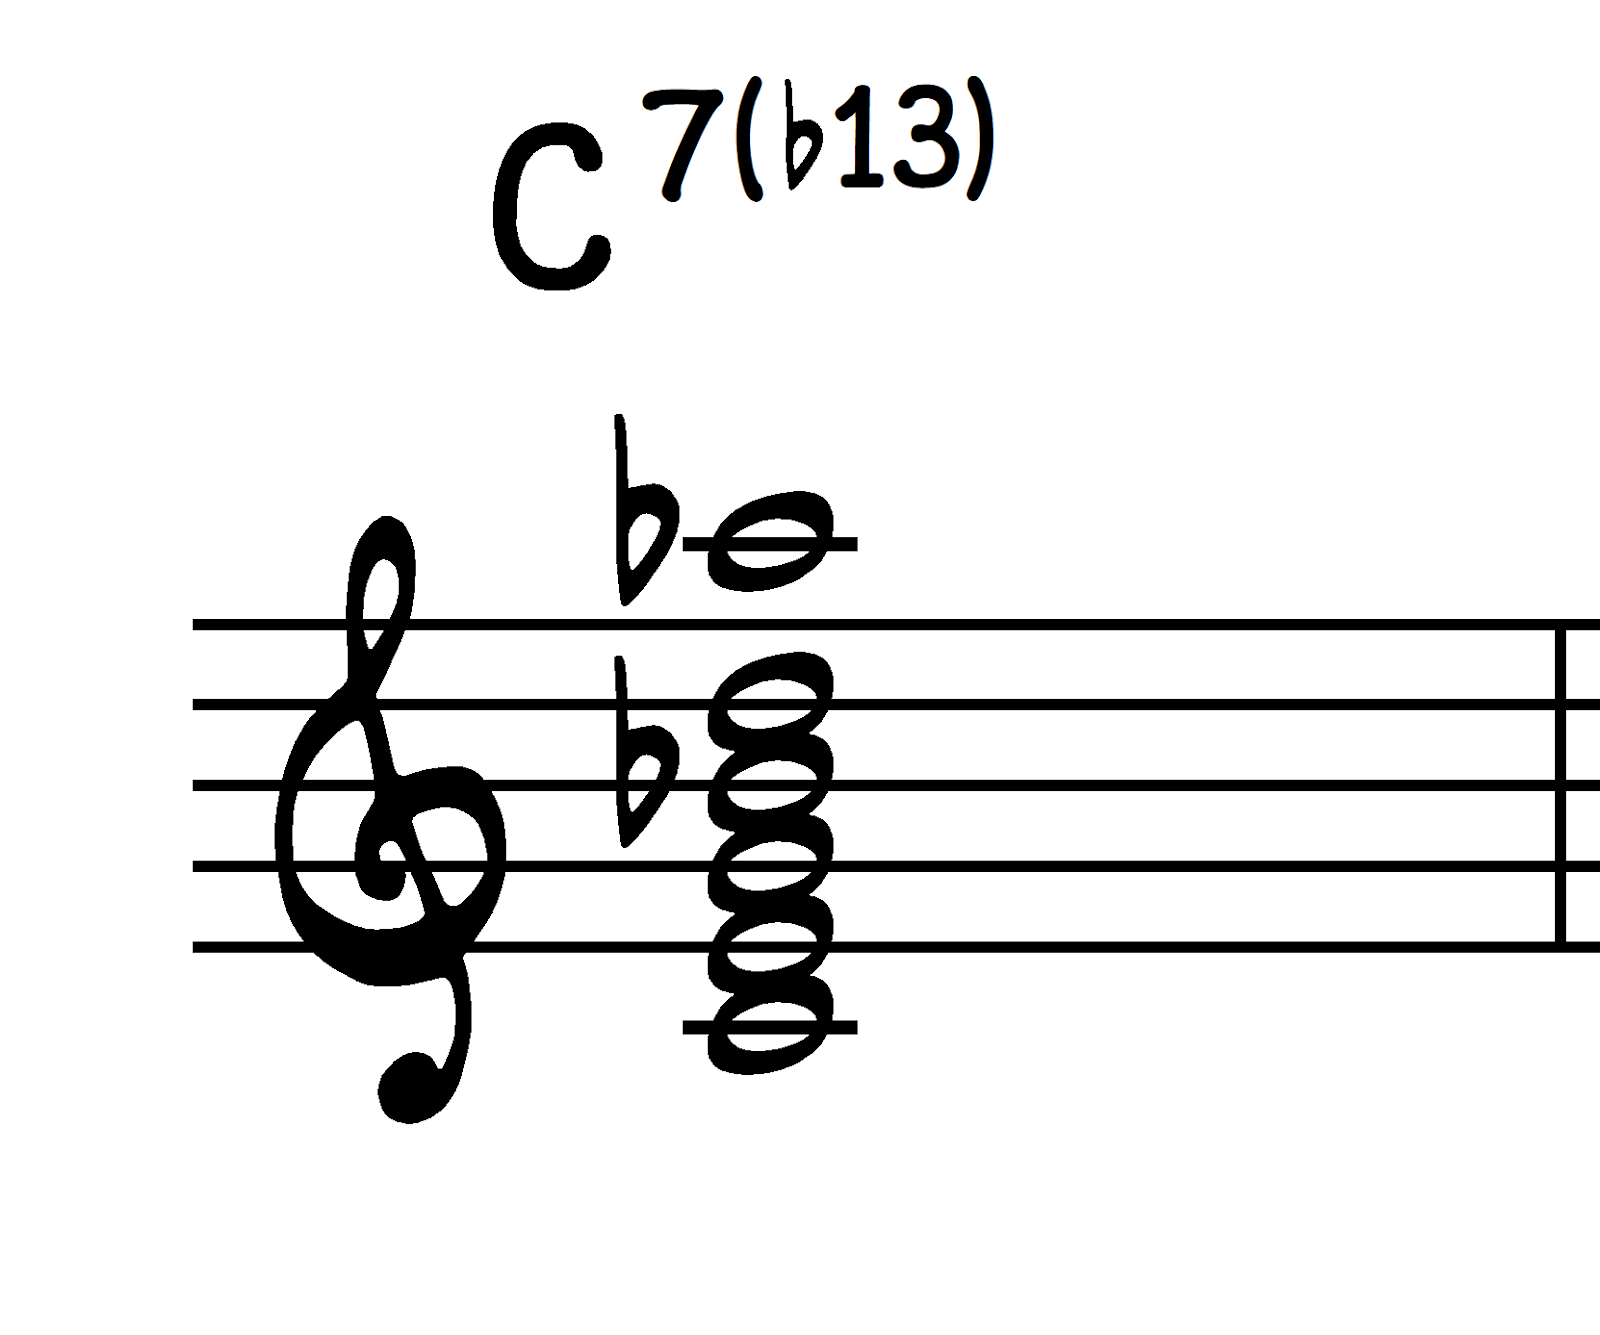 A C7b13 chord in close root position. 